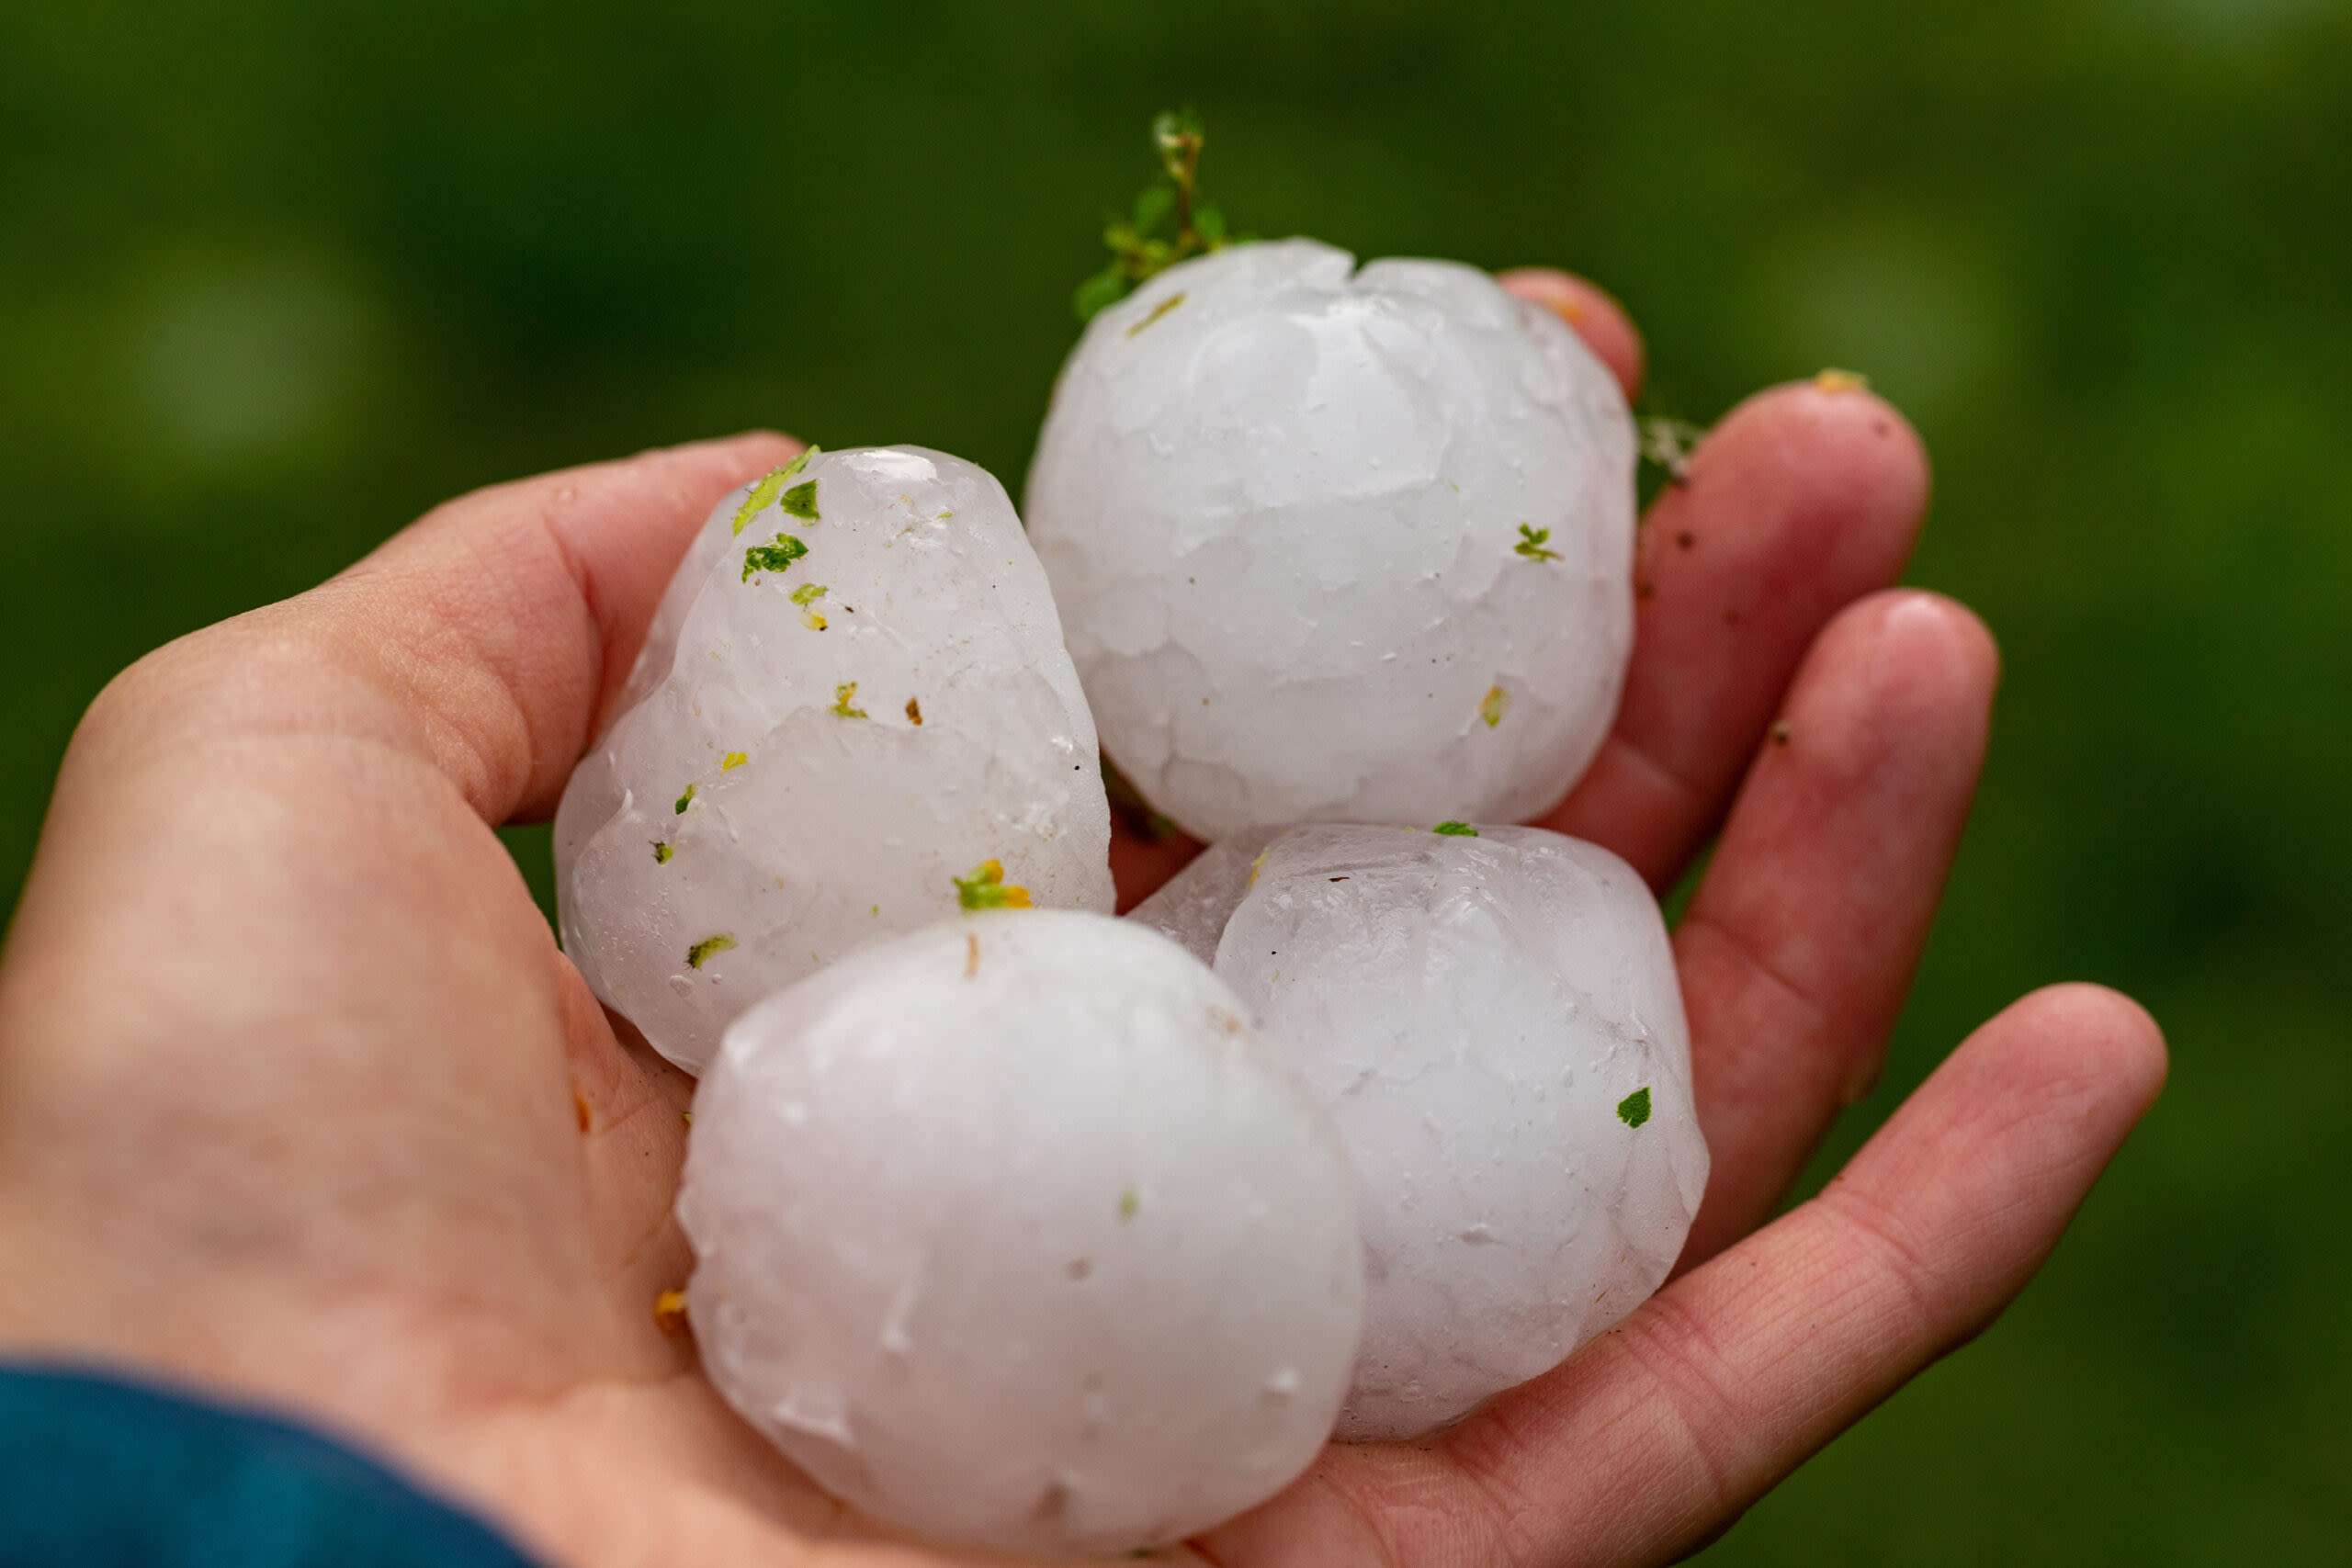 Report Using Aerial Imagery Keys in on Hailstorm Risks to Colorado Homes